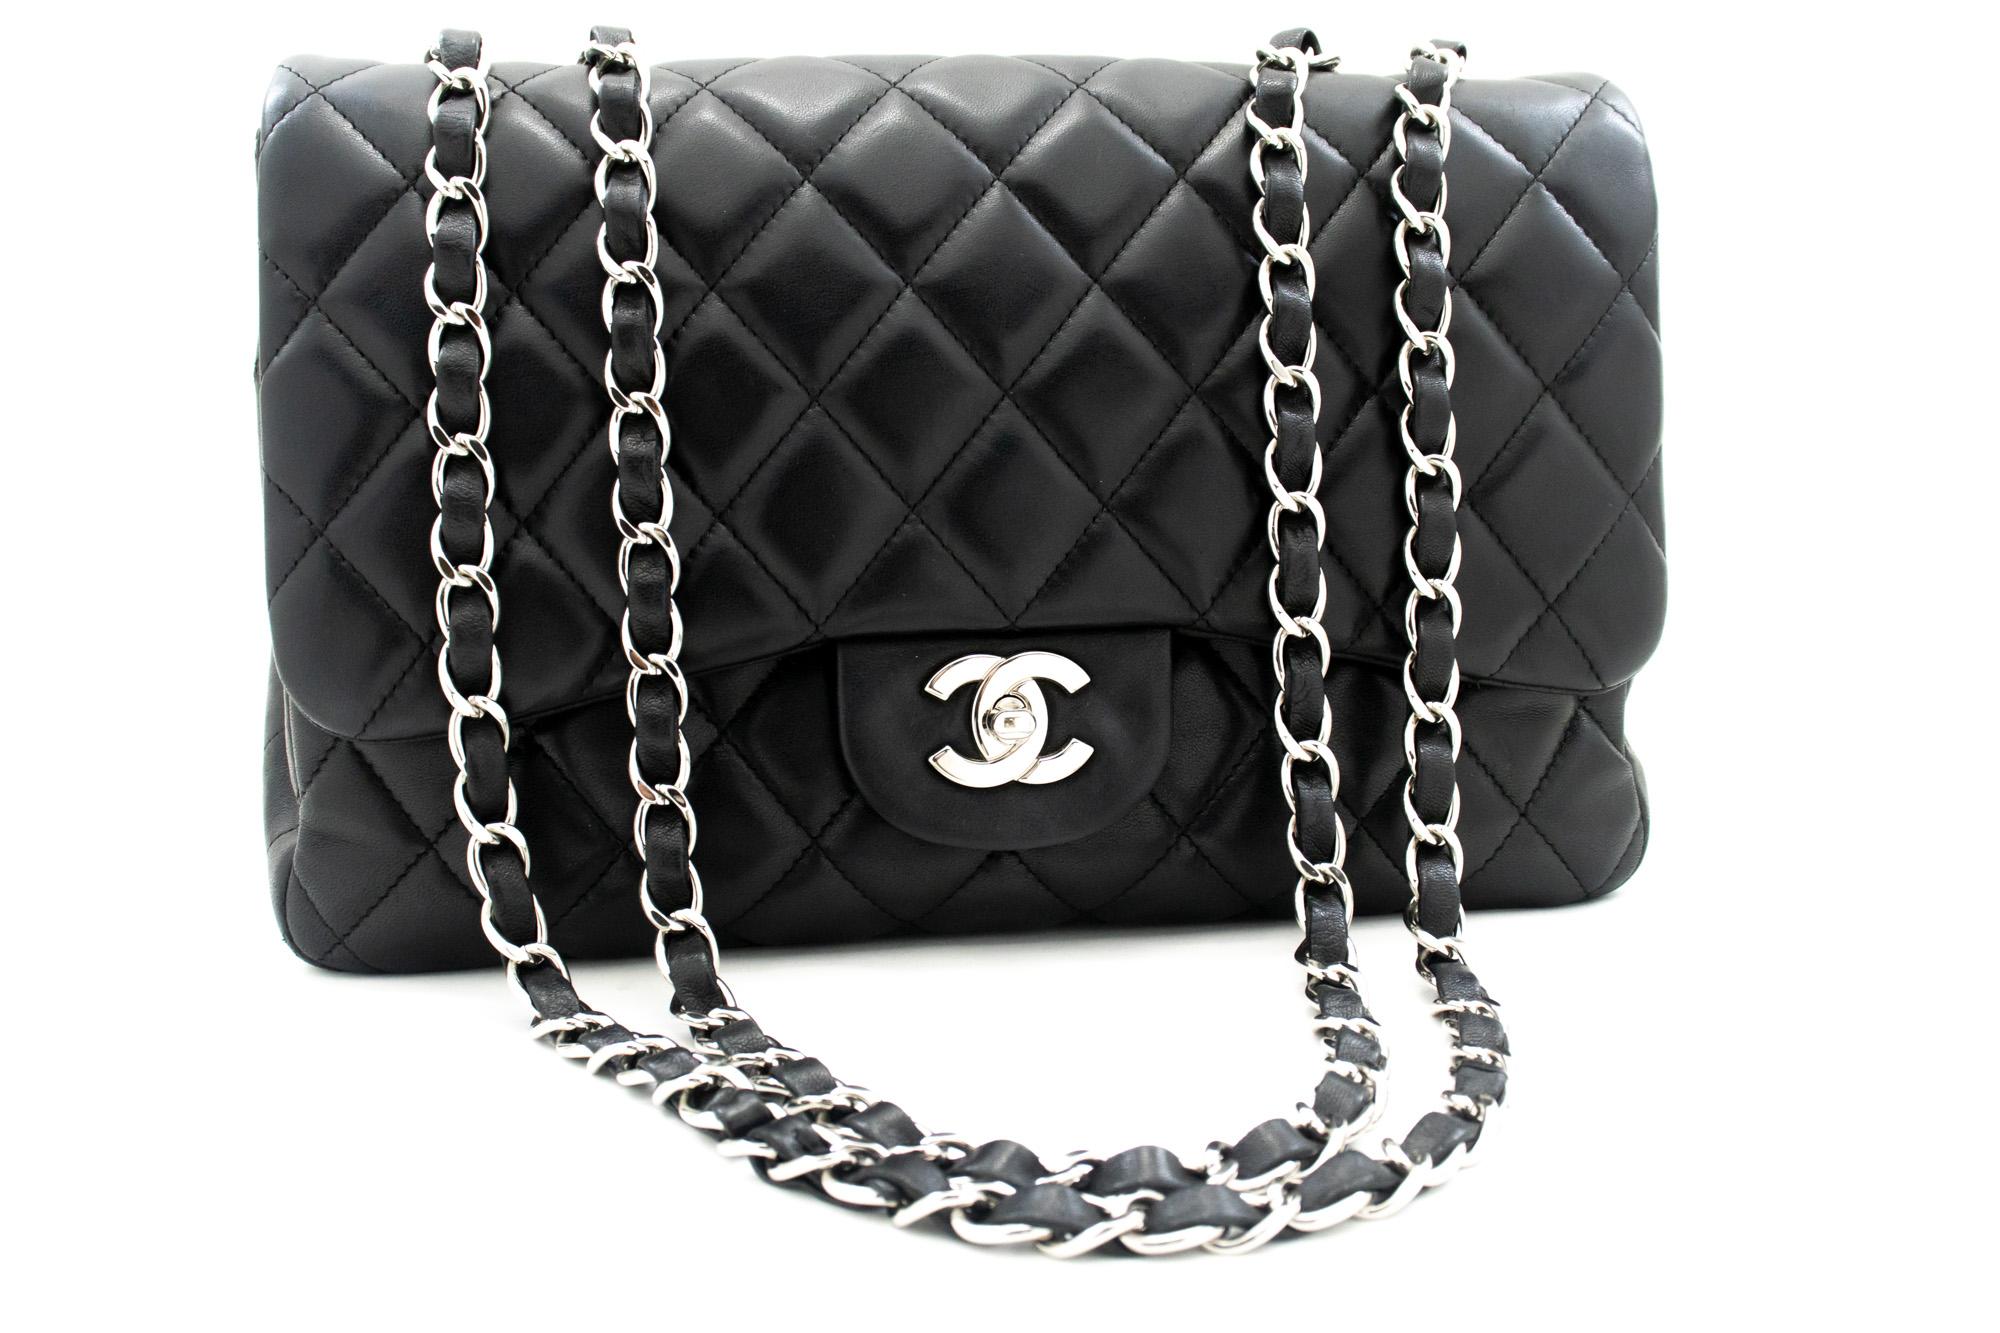 An authentic CHANEL Classic Large 11